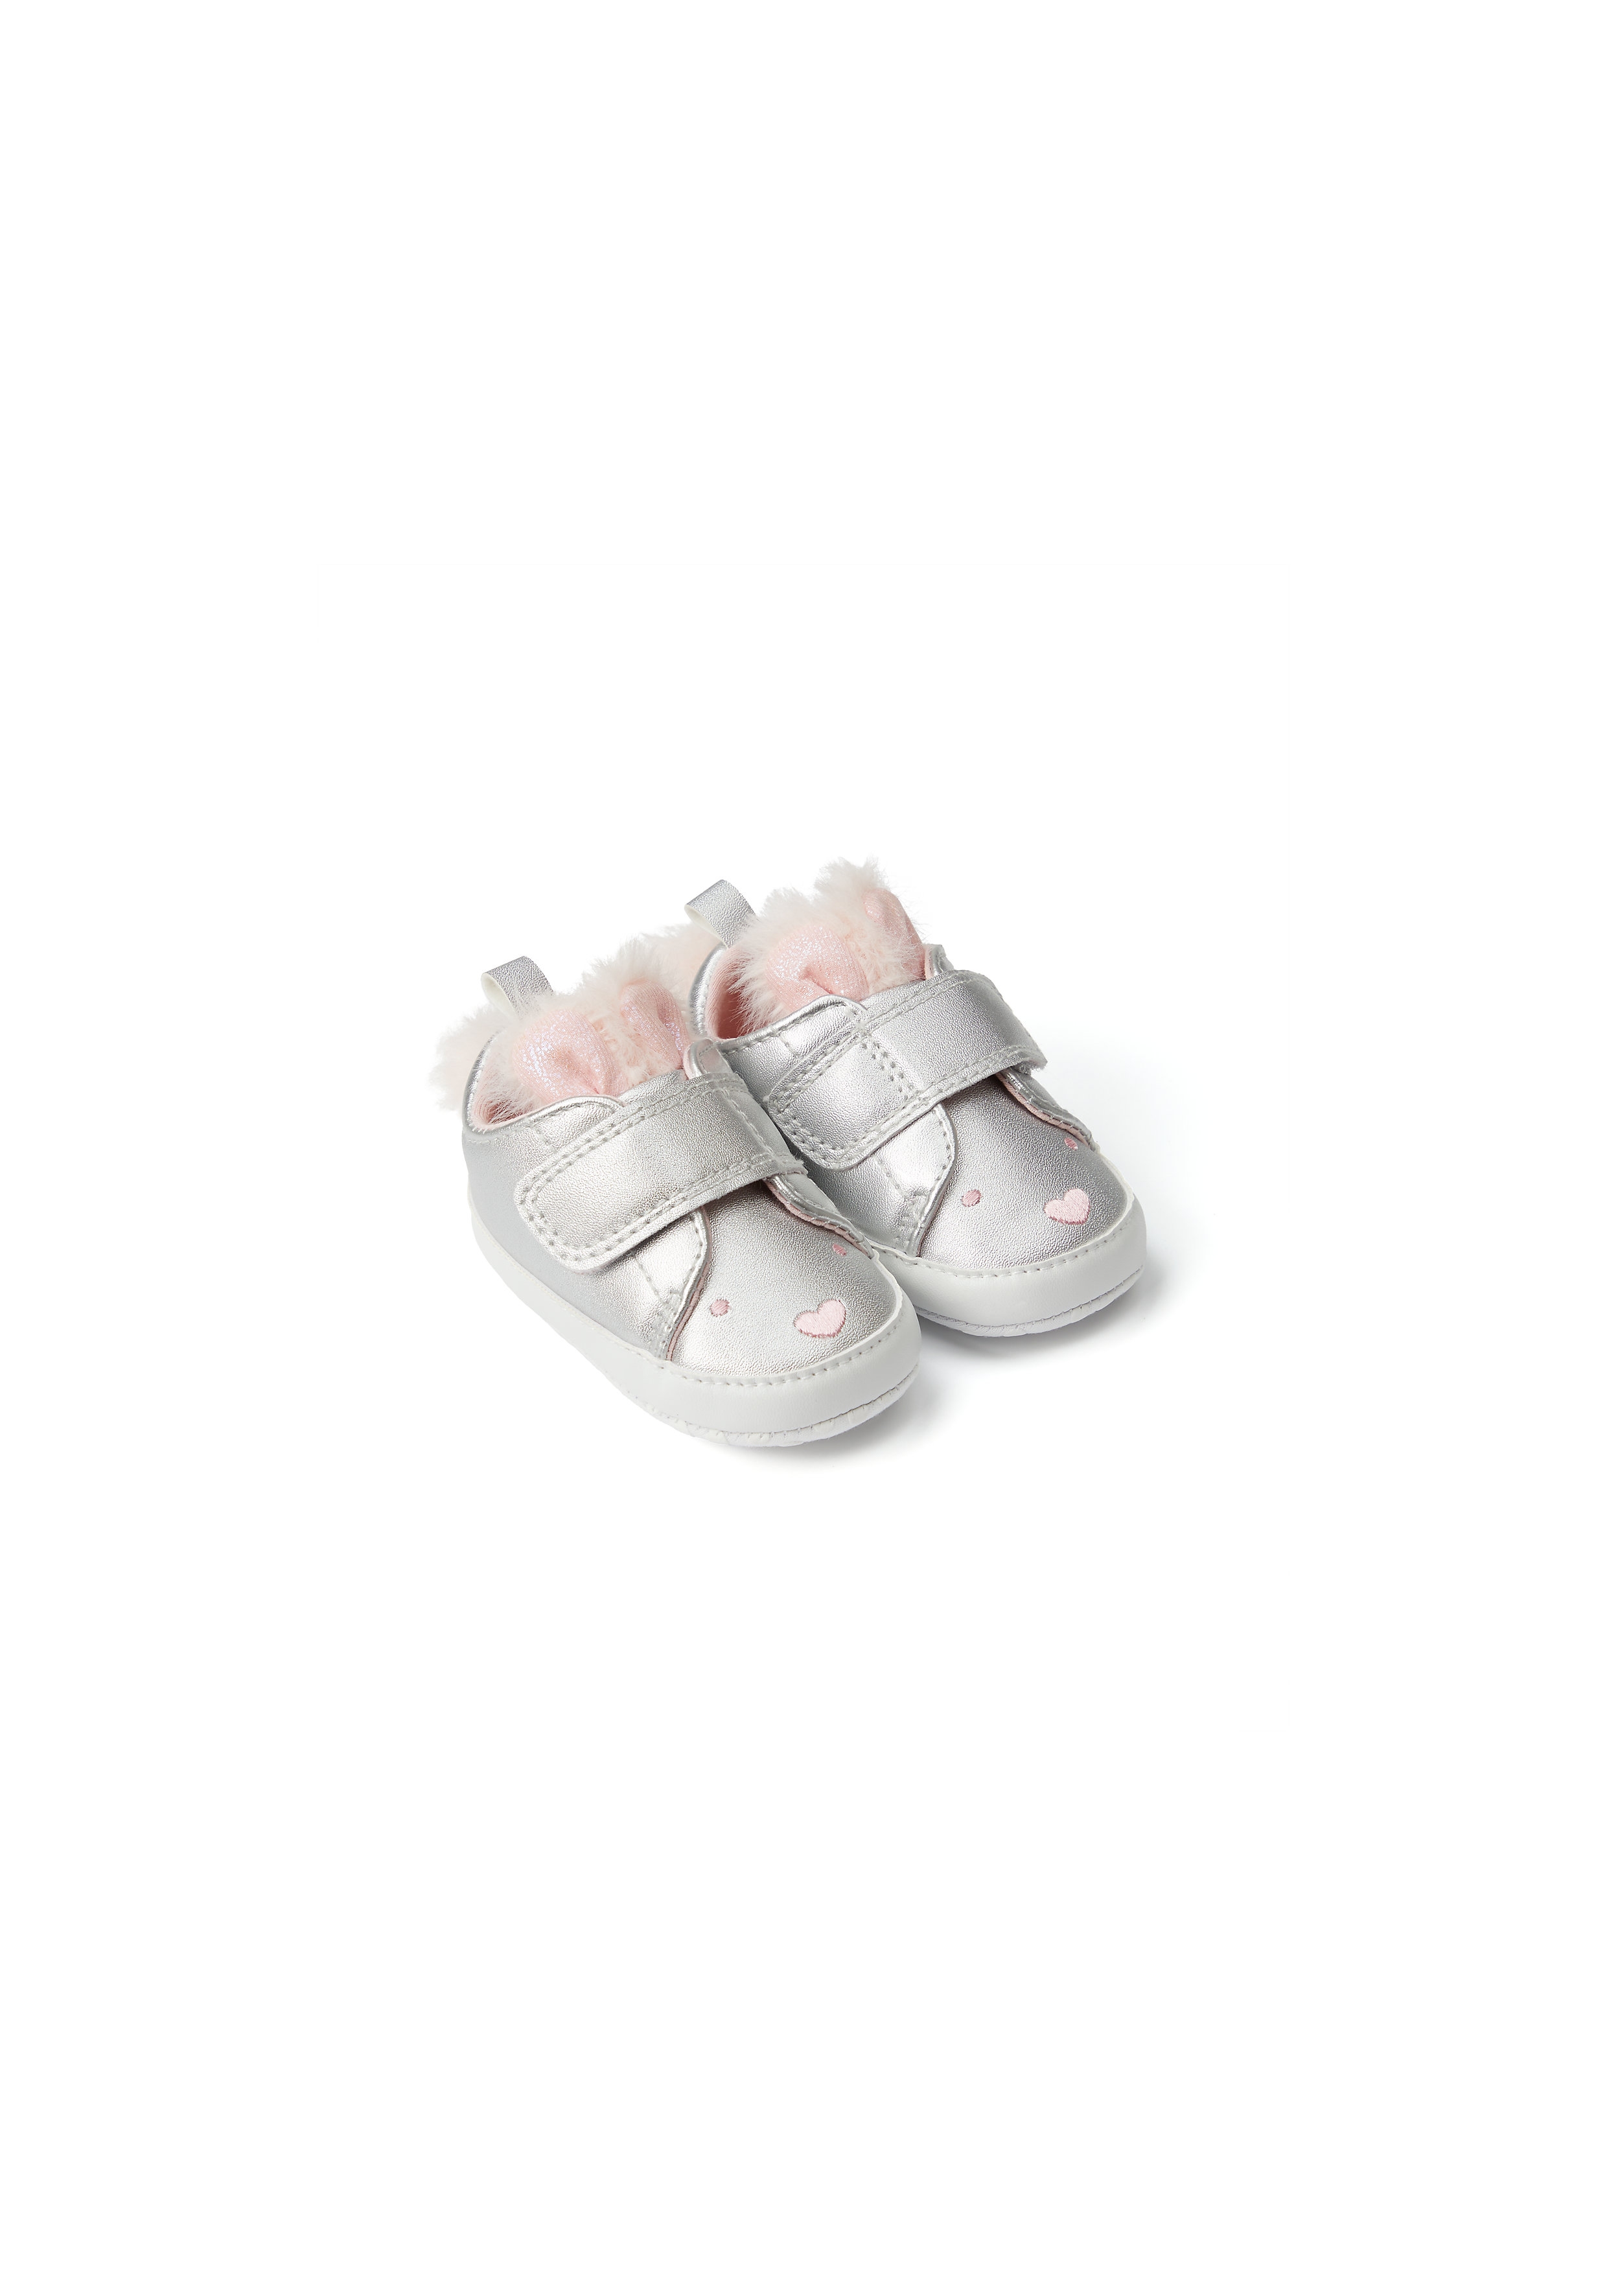 Mothercare | Girls Pram Shoes 3D Bunny Ears - Silver